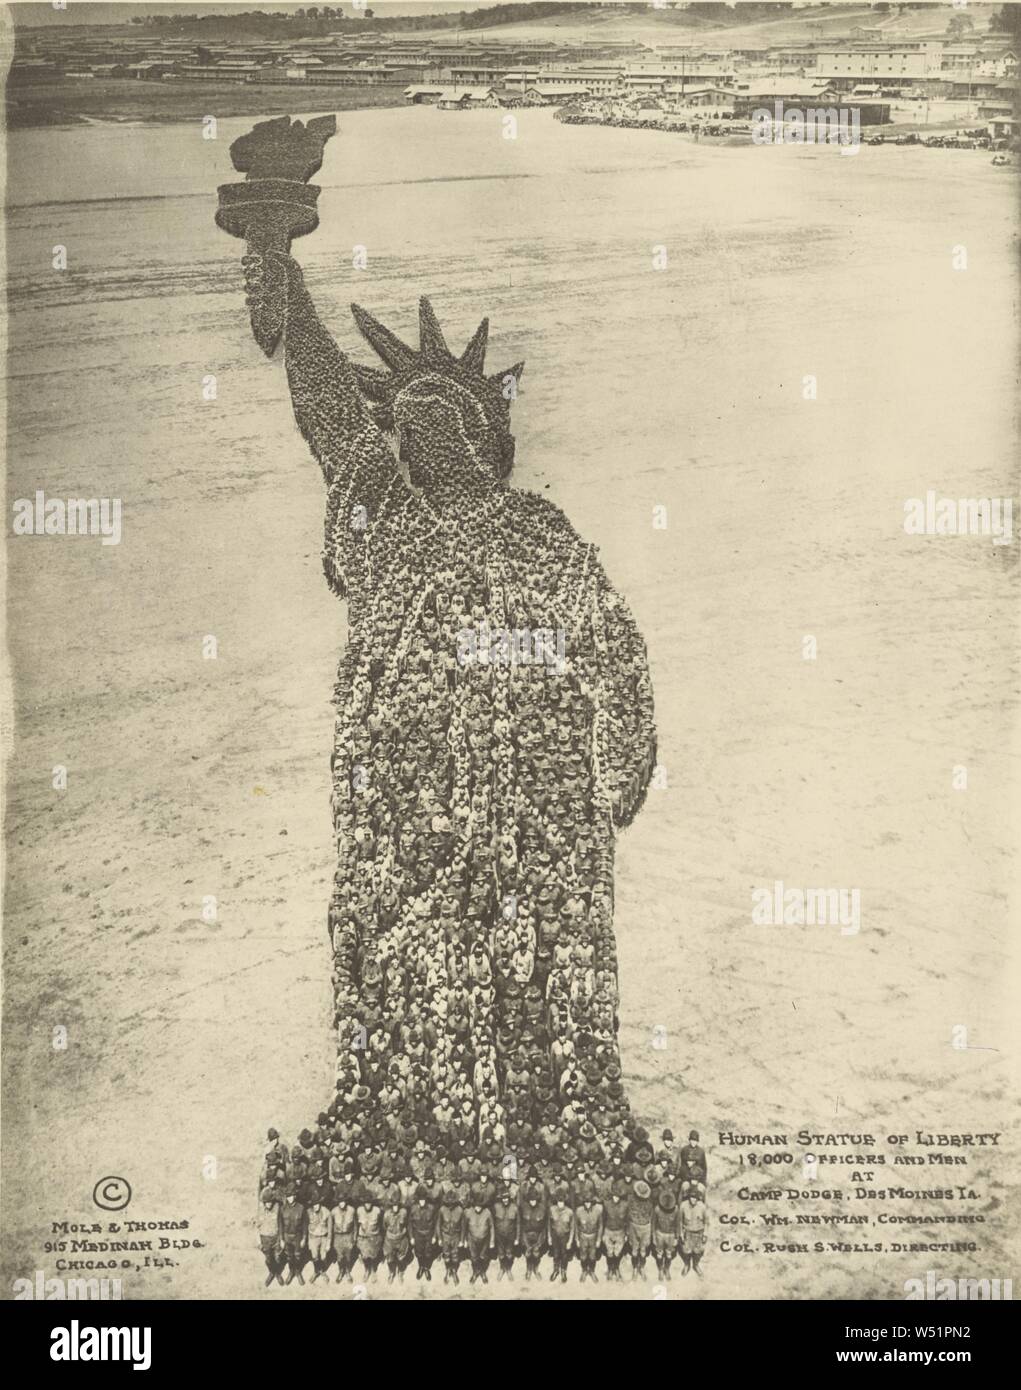 Human Statue of Liberty. 18,000 Officers and Men at Camp Dodge, Des Moines, Ia. Col. Wm. Newman Commanding. Col. Rush S. Wells, Directing., Mole & Thomas (American, active about 1910 - 1919), Chicago, Illinois, United States, about 1918, Gelatin silver print, 34.3 × 27.1 cm (13 1/2 × 10 11/16 in Stock Photo